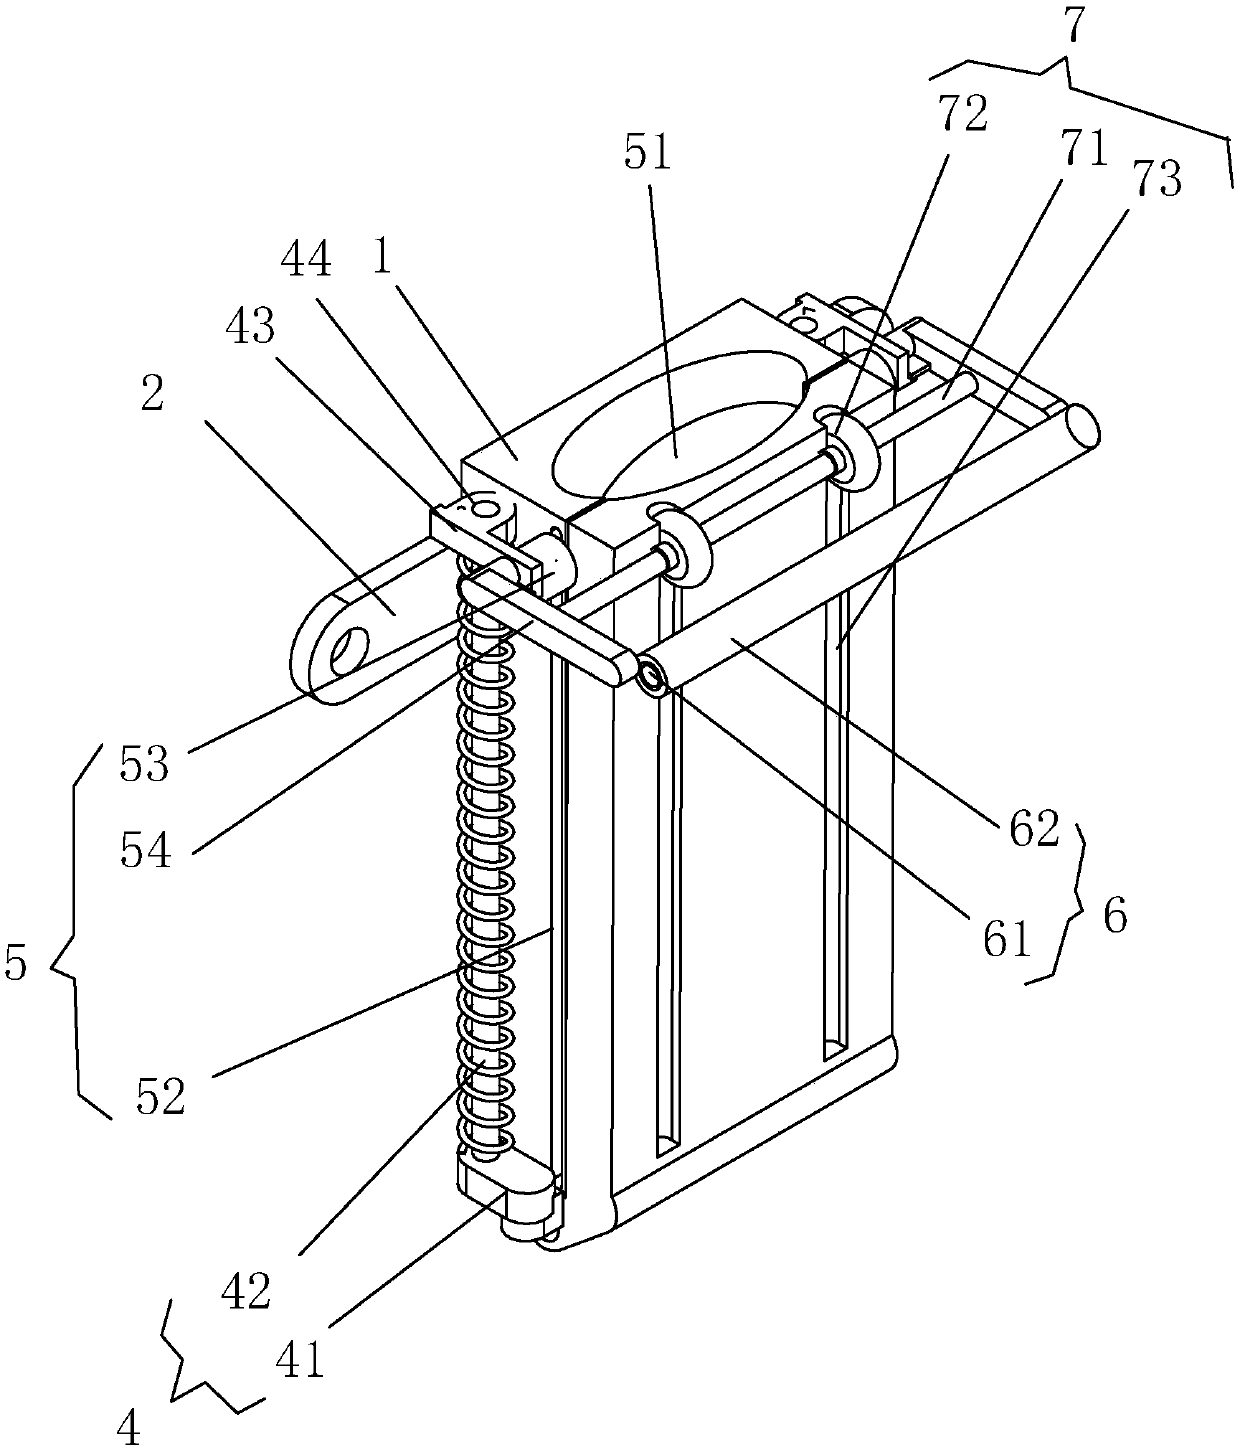 Toothpaste extrusion device